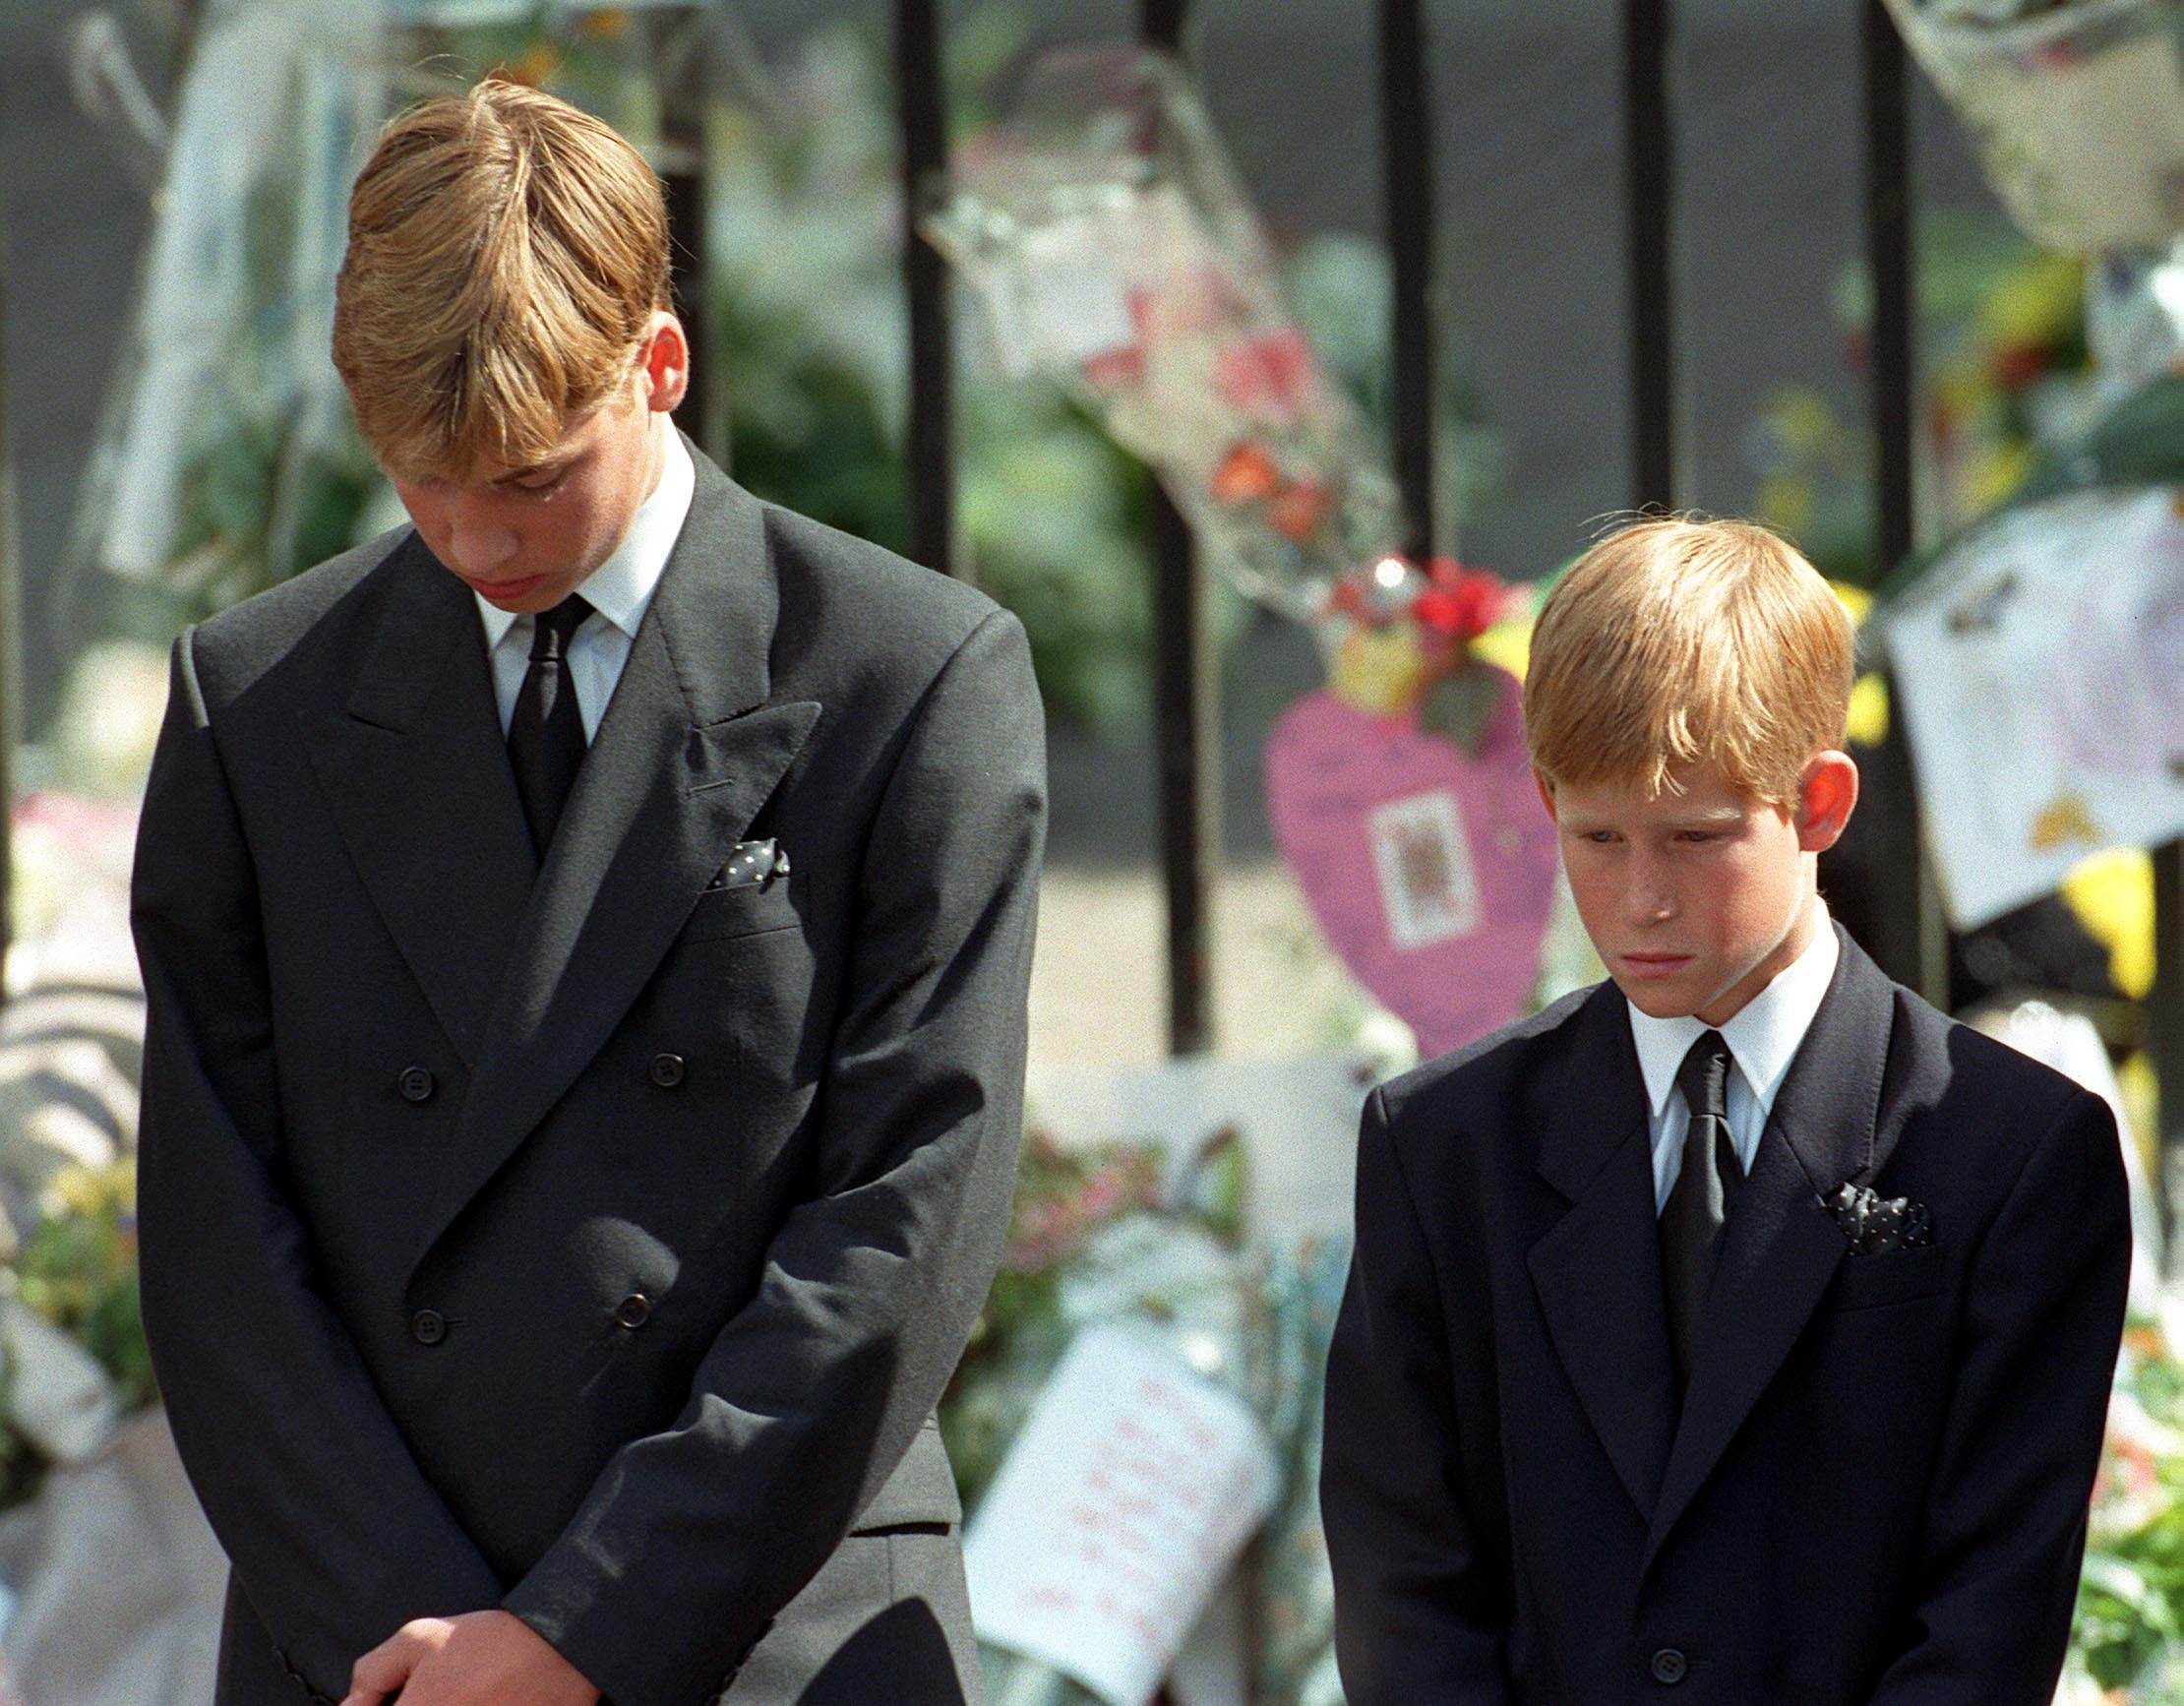 Prince William (left) and Prince Harry, the sons of Diana, Princess of Wales, bow their heads as their mother's coffin is taken out of Westminster Abbey following her funeral service. | Source: Getty Images